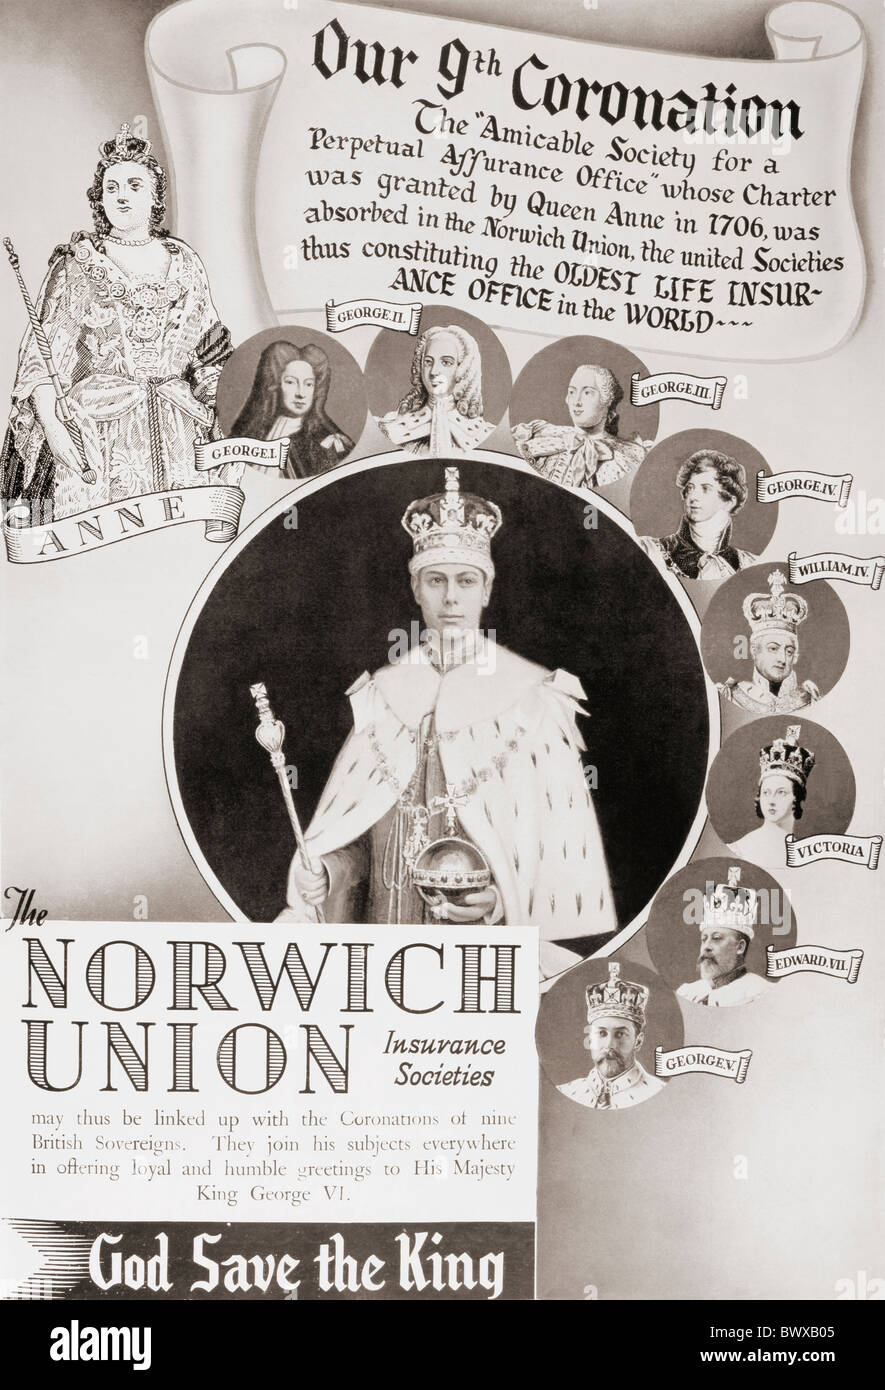 A 1937 advertisement for The Norwich Union Insurance Society, to celebrate George VI's and it's 9th Coronation. Stock Photo